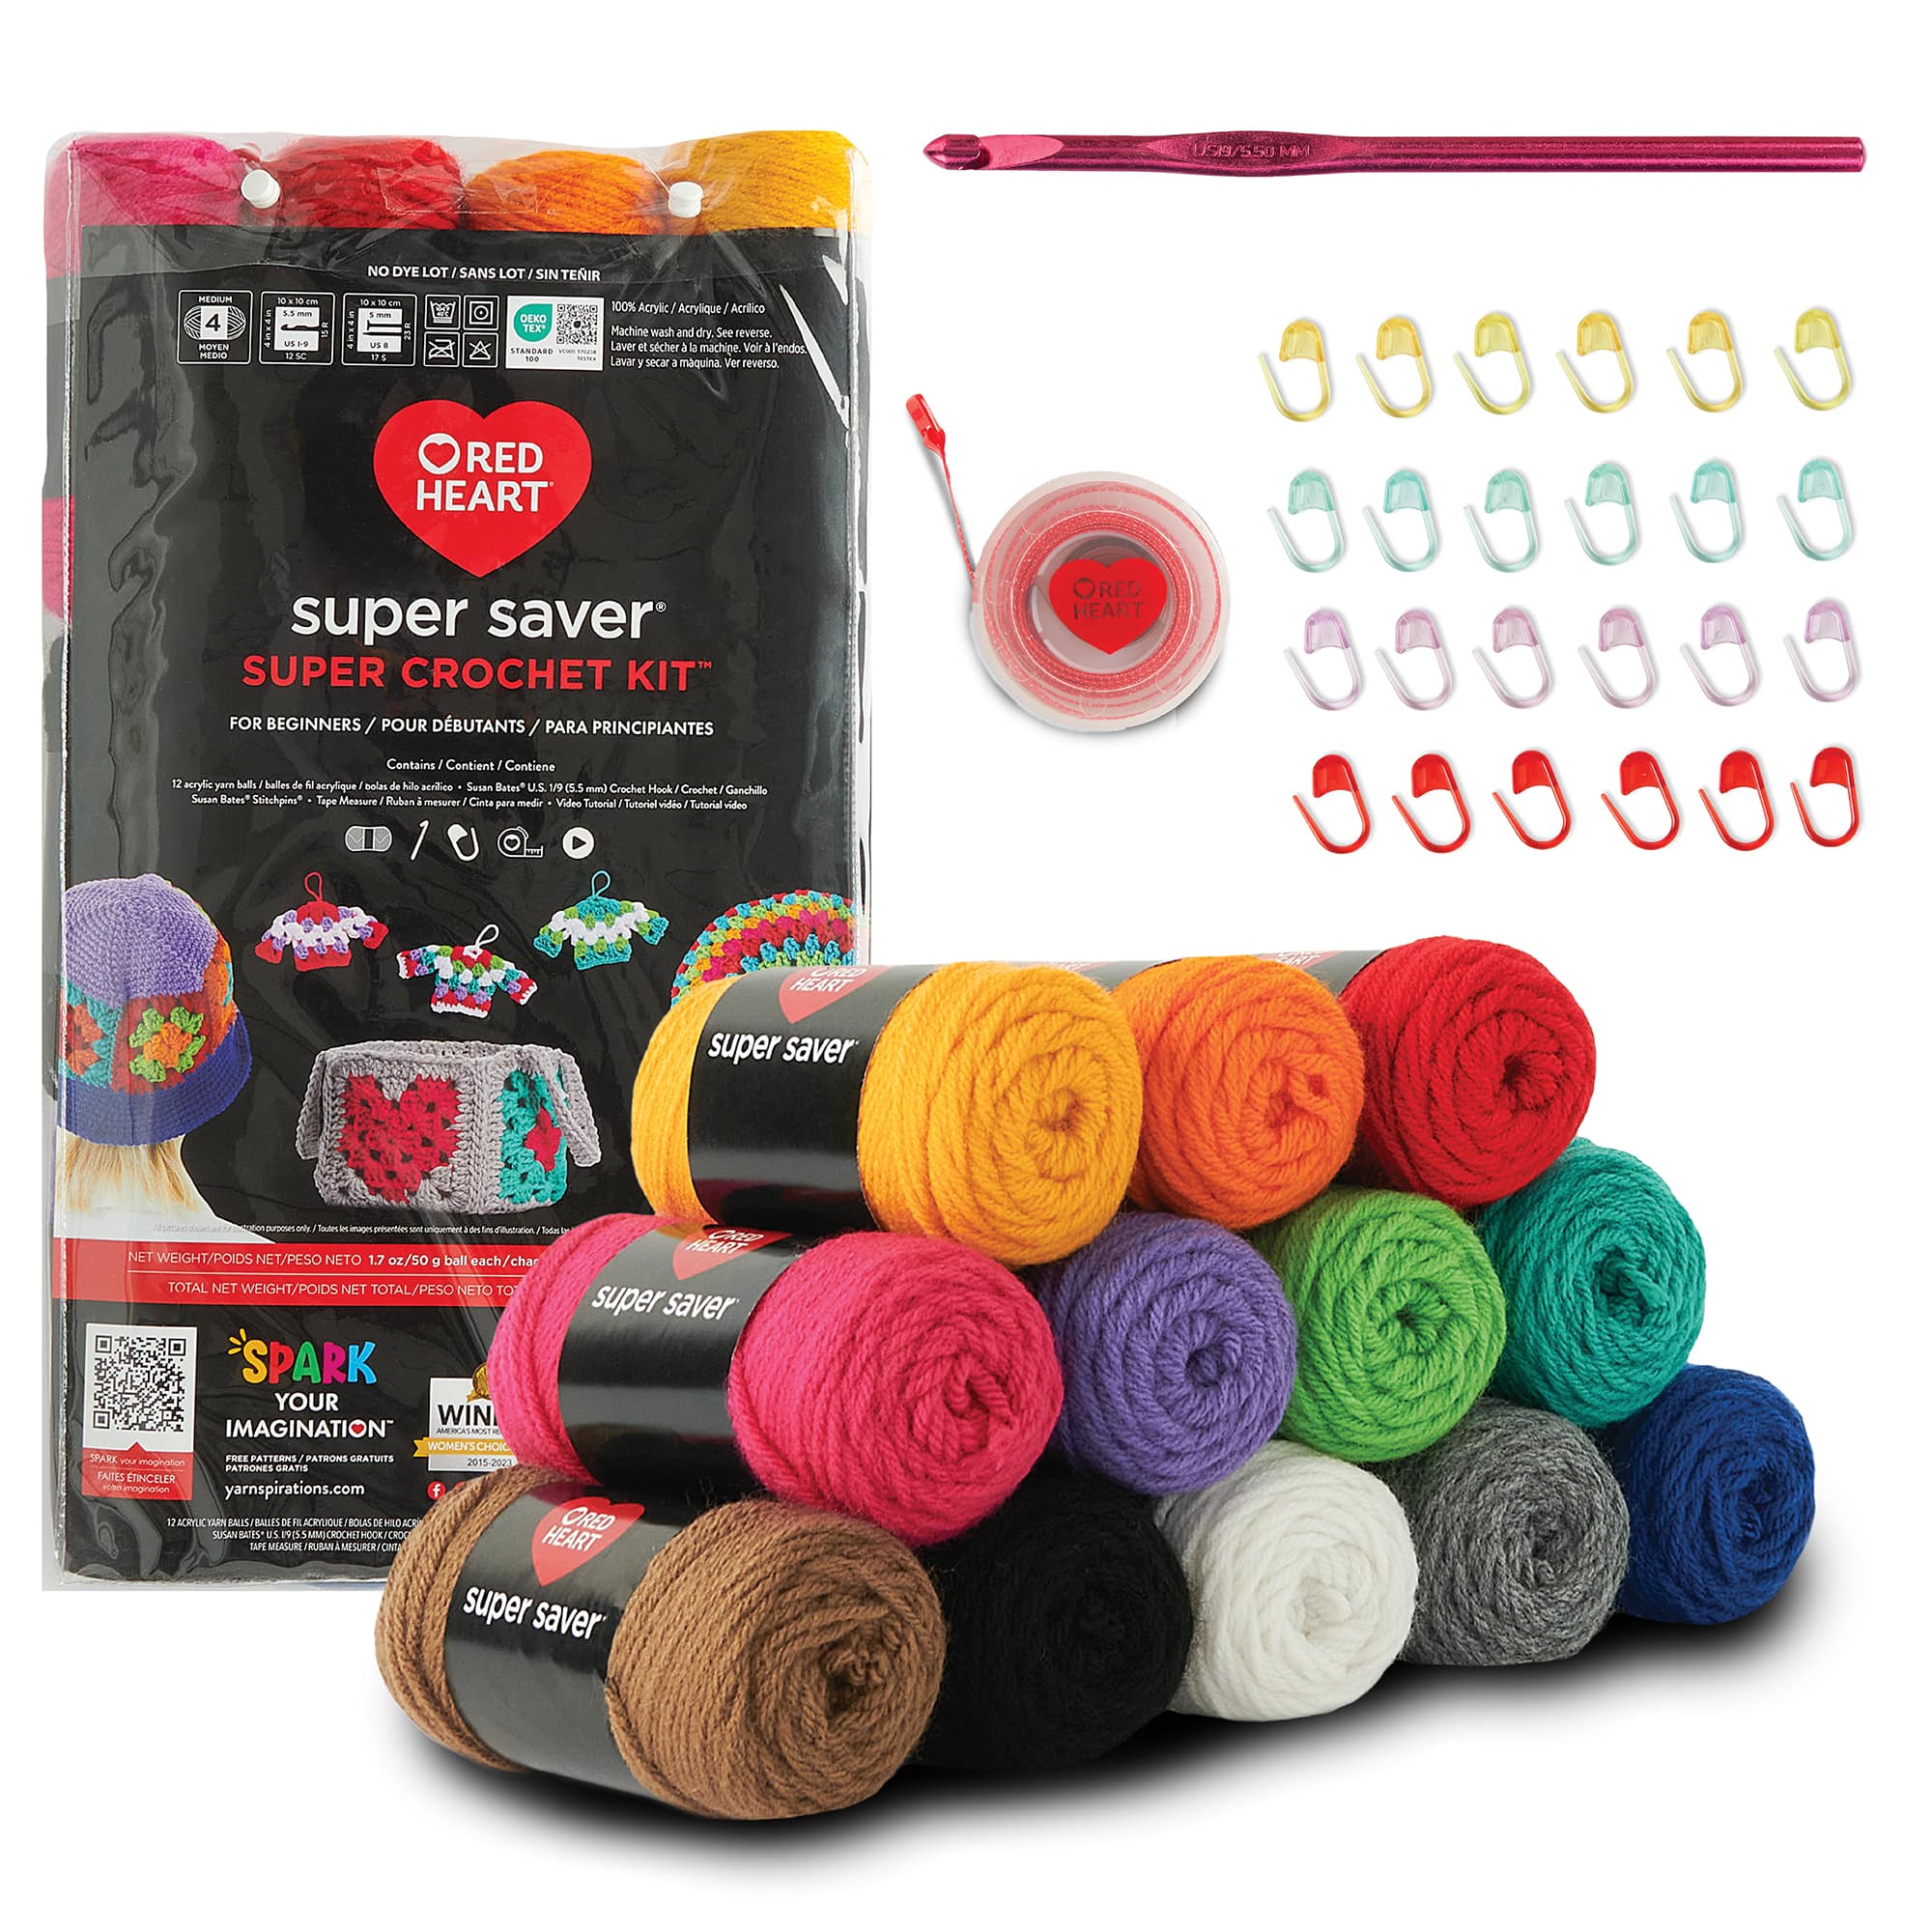 Buy the Red Heart Fabric By Loops & Threads® at Michaels